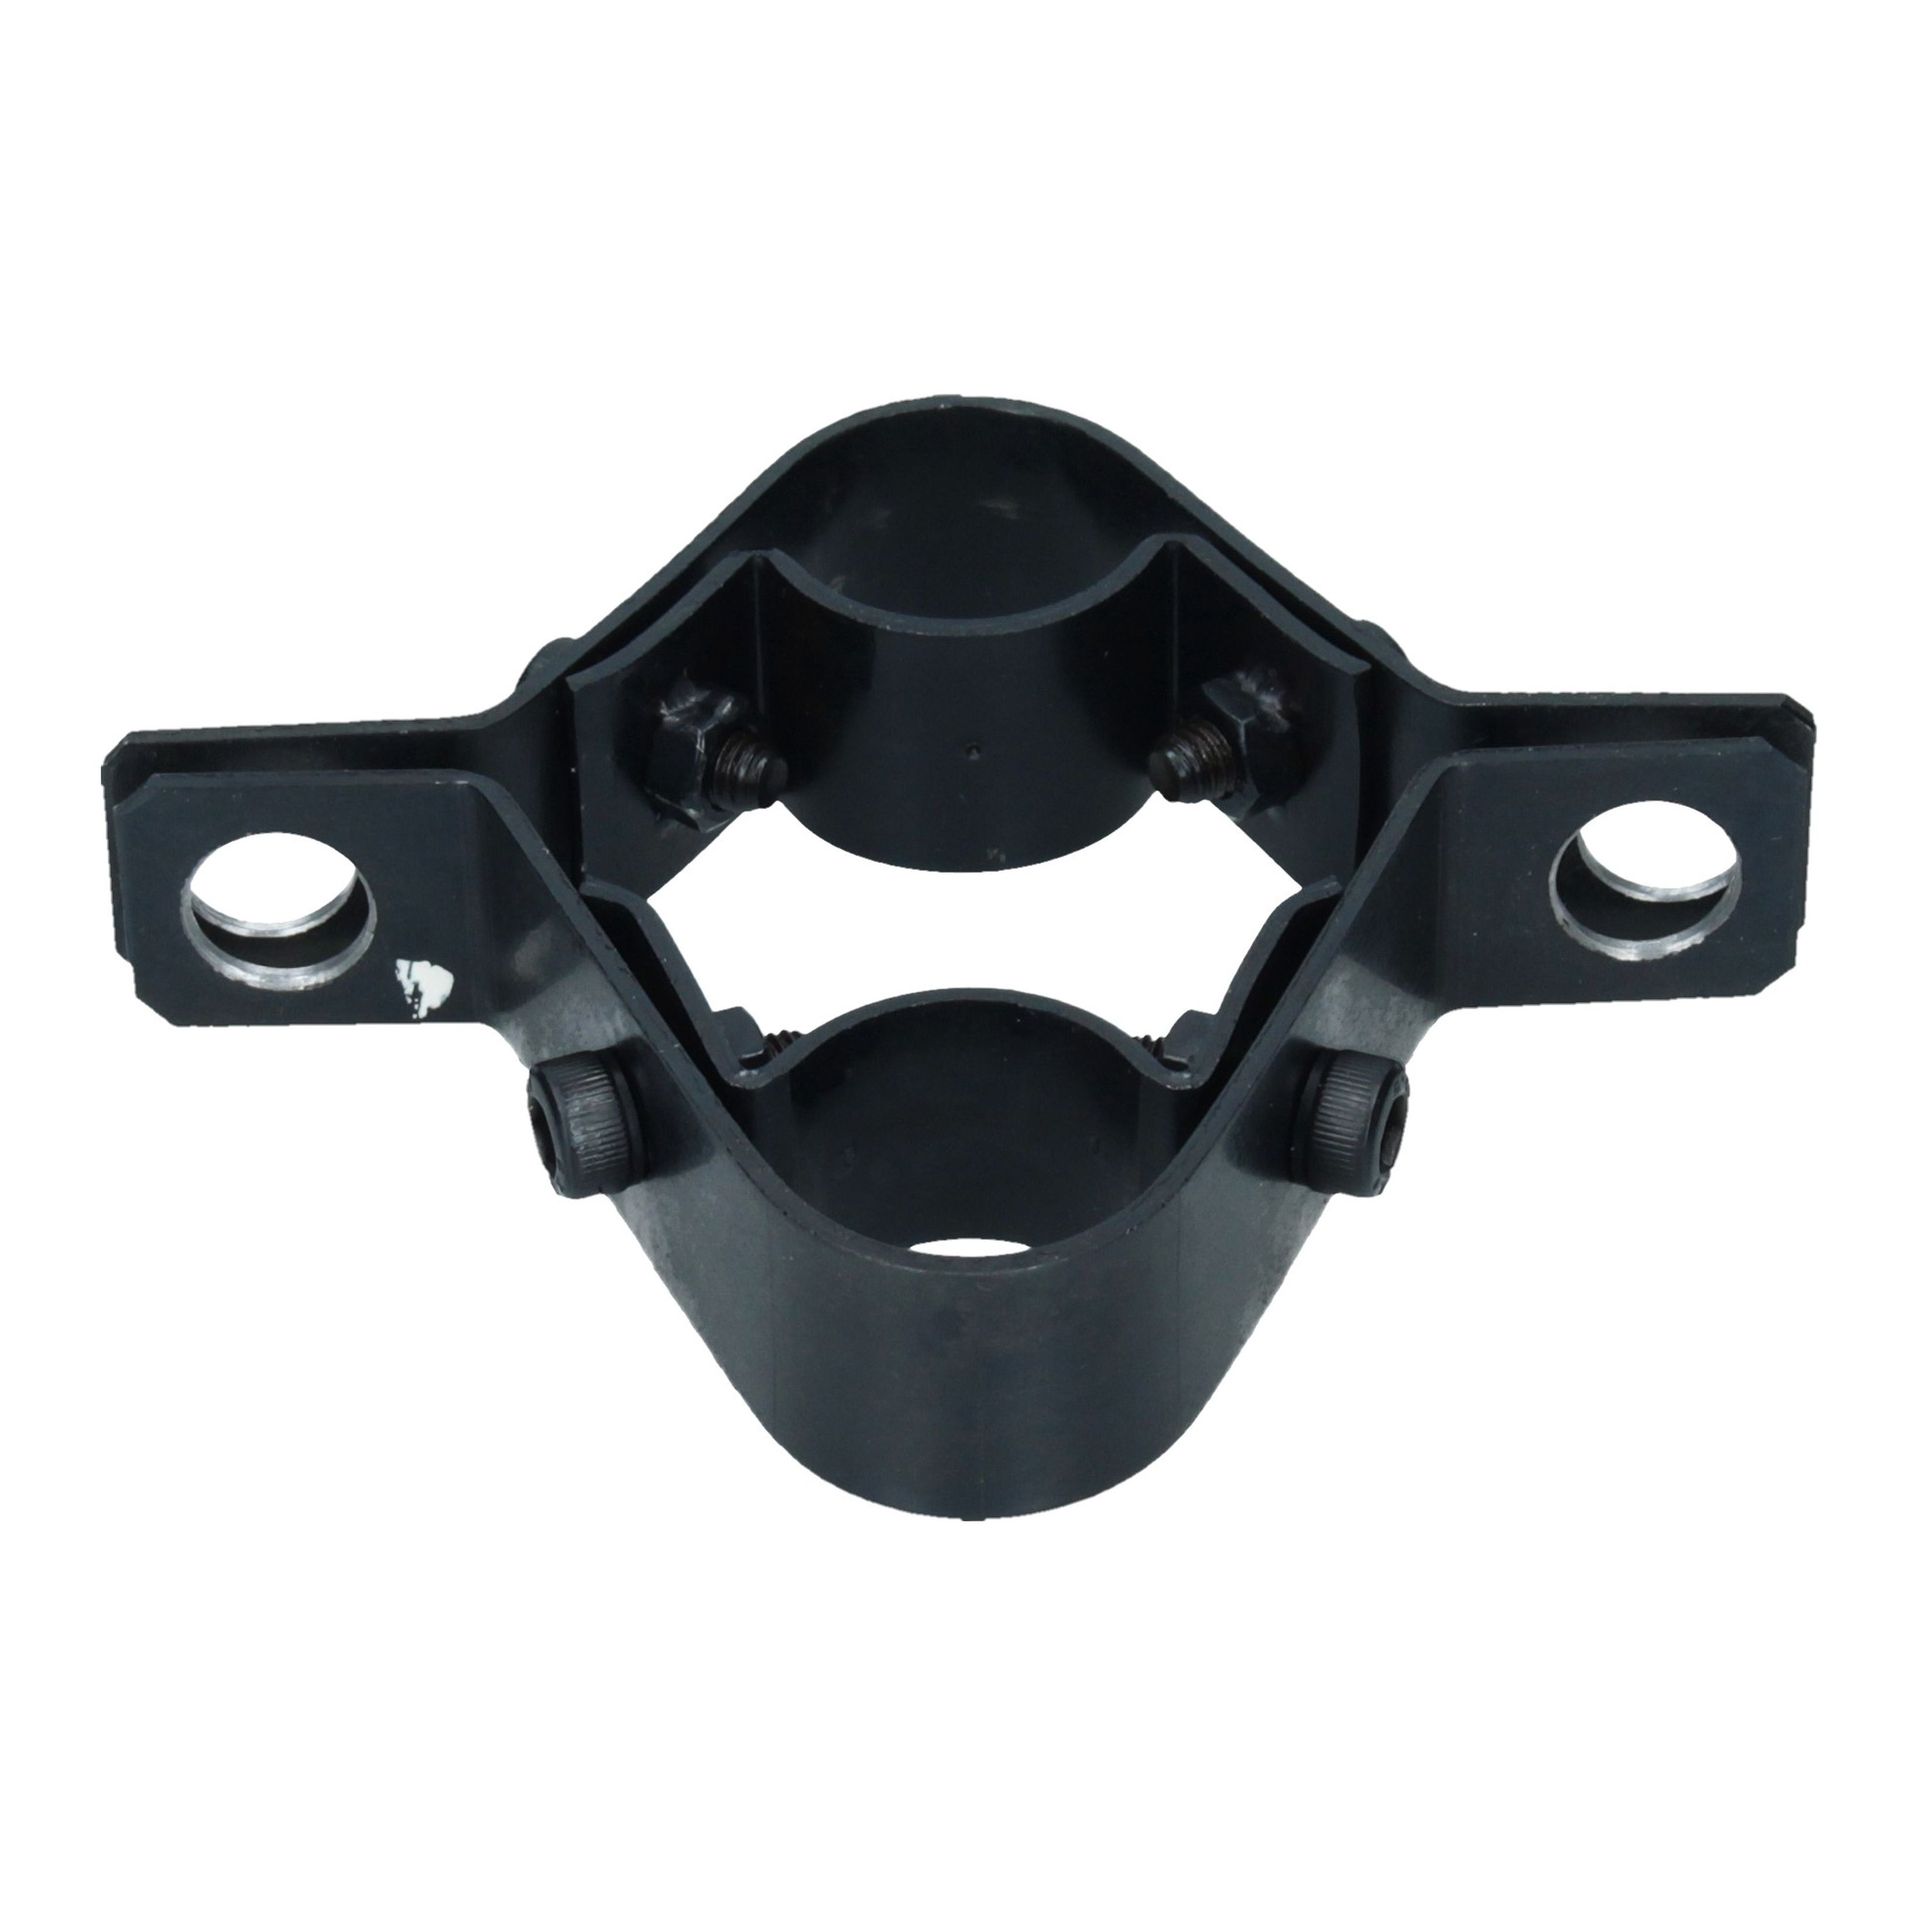 Oil Pick Up Pipe Clamp Set (4 Part Set)